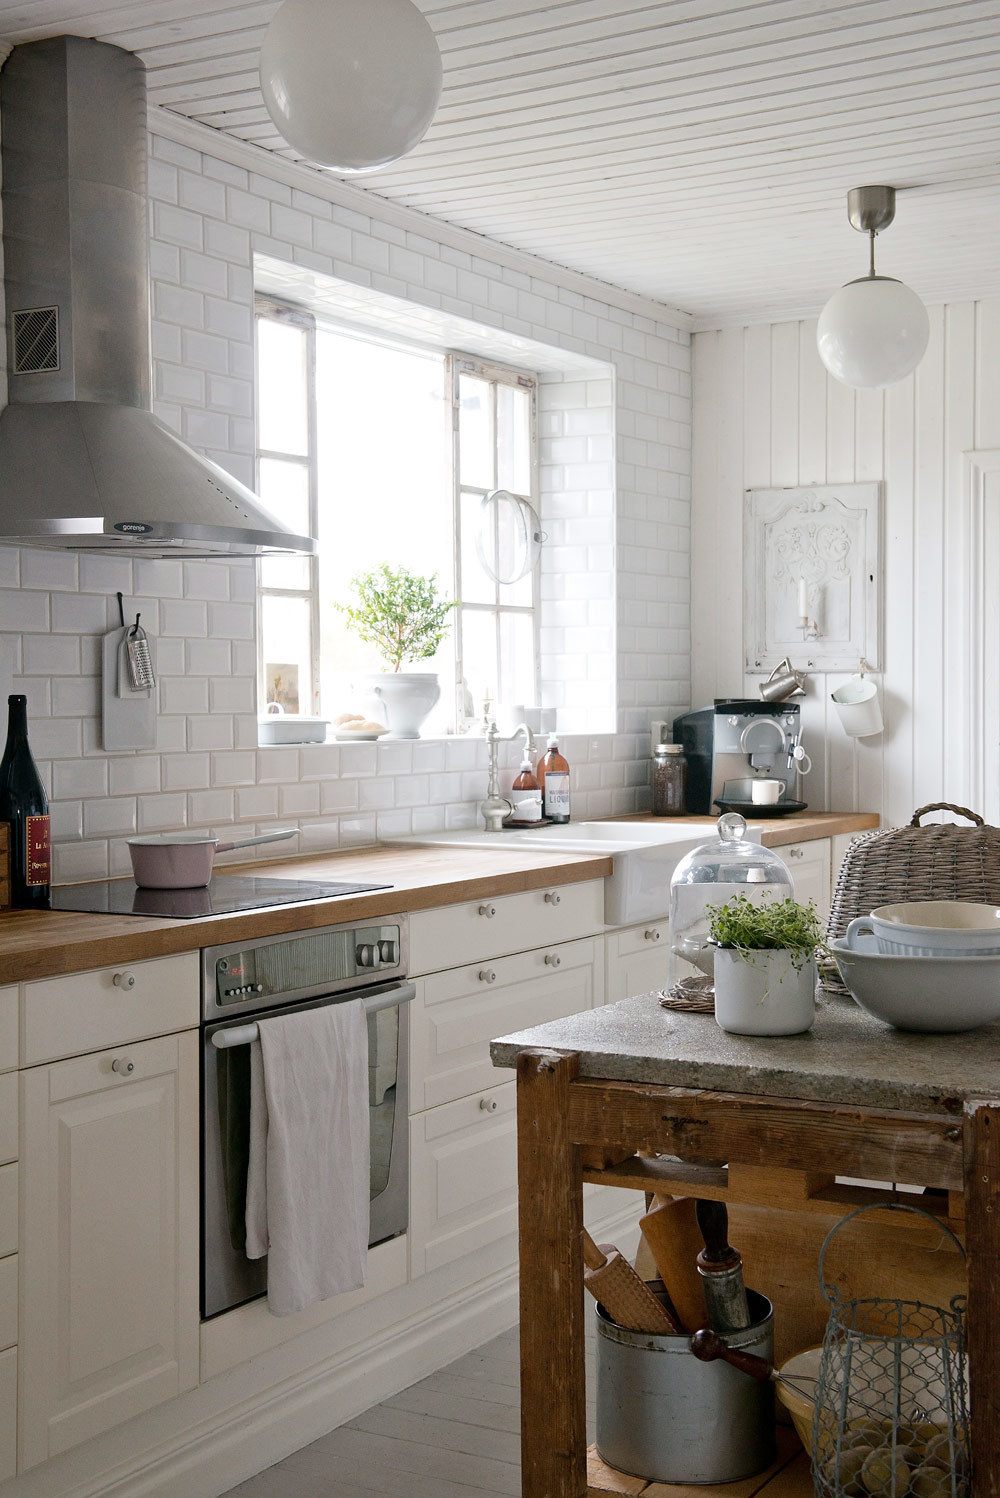 My Kitchen Dilemma: Modern or Country? - Skimbaco Lifestyle online